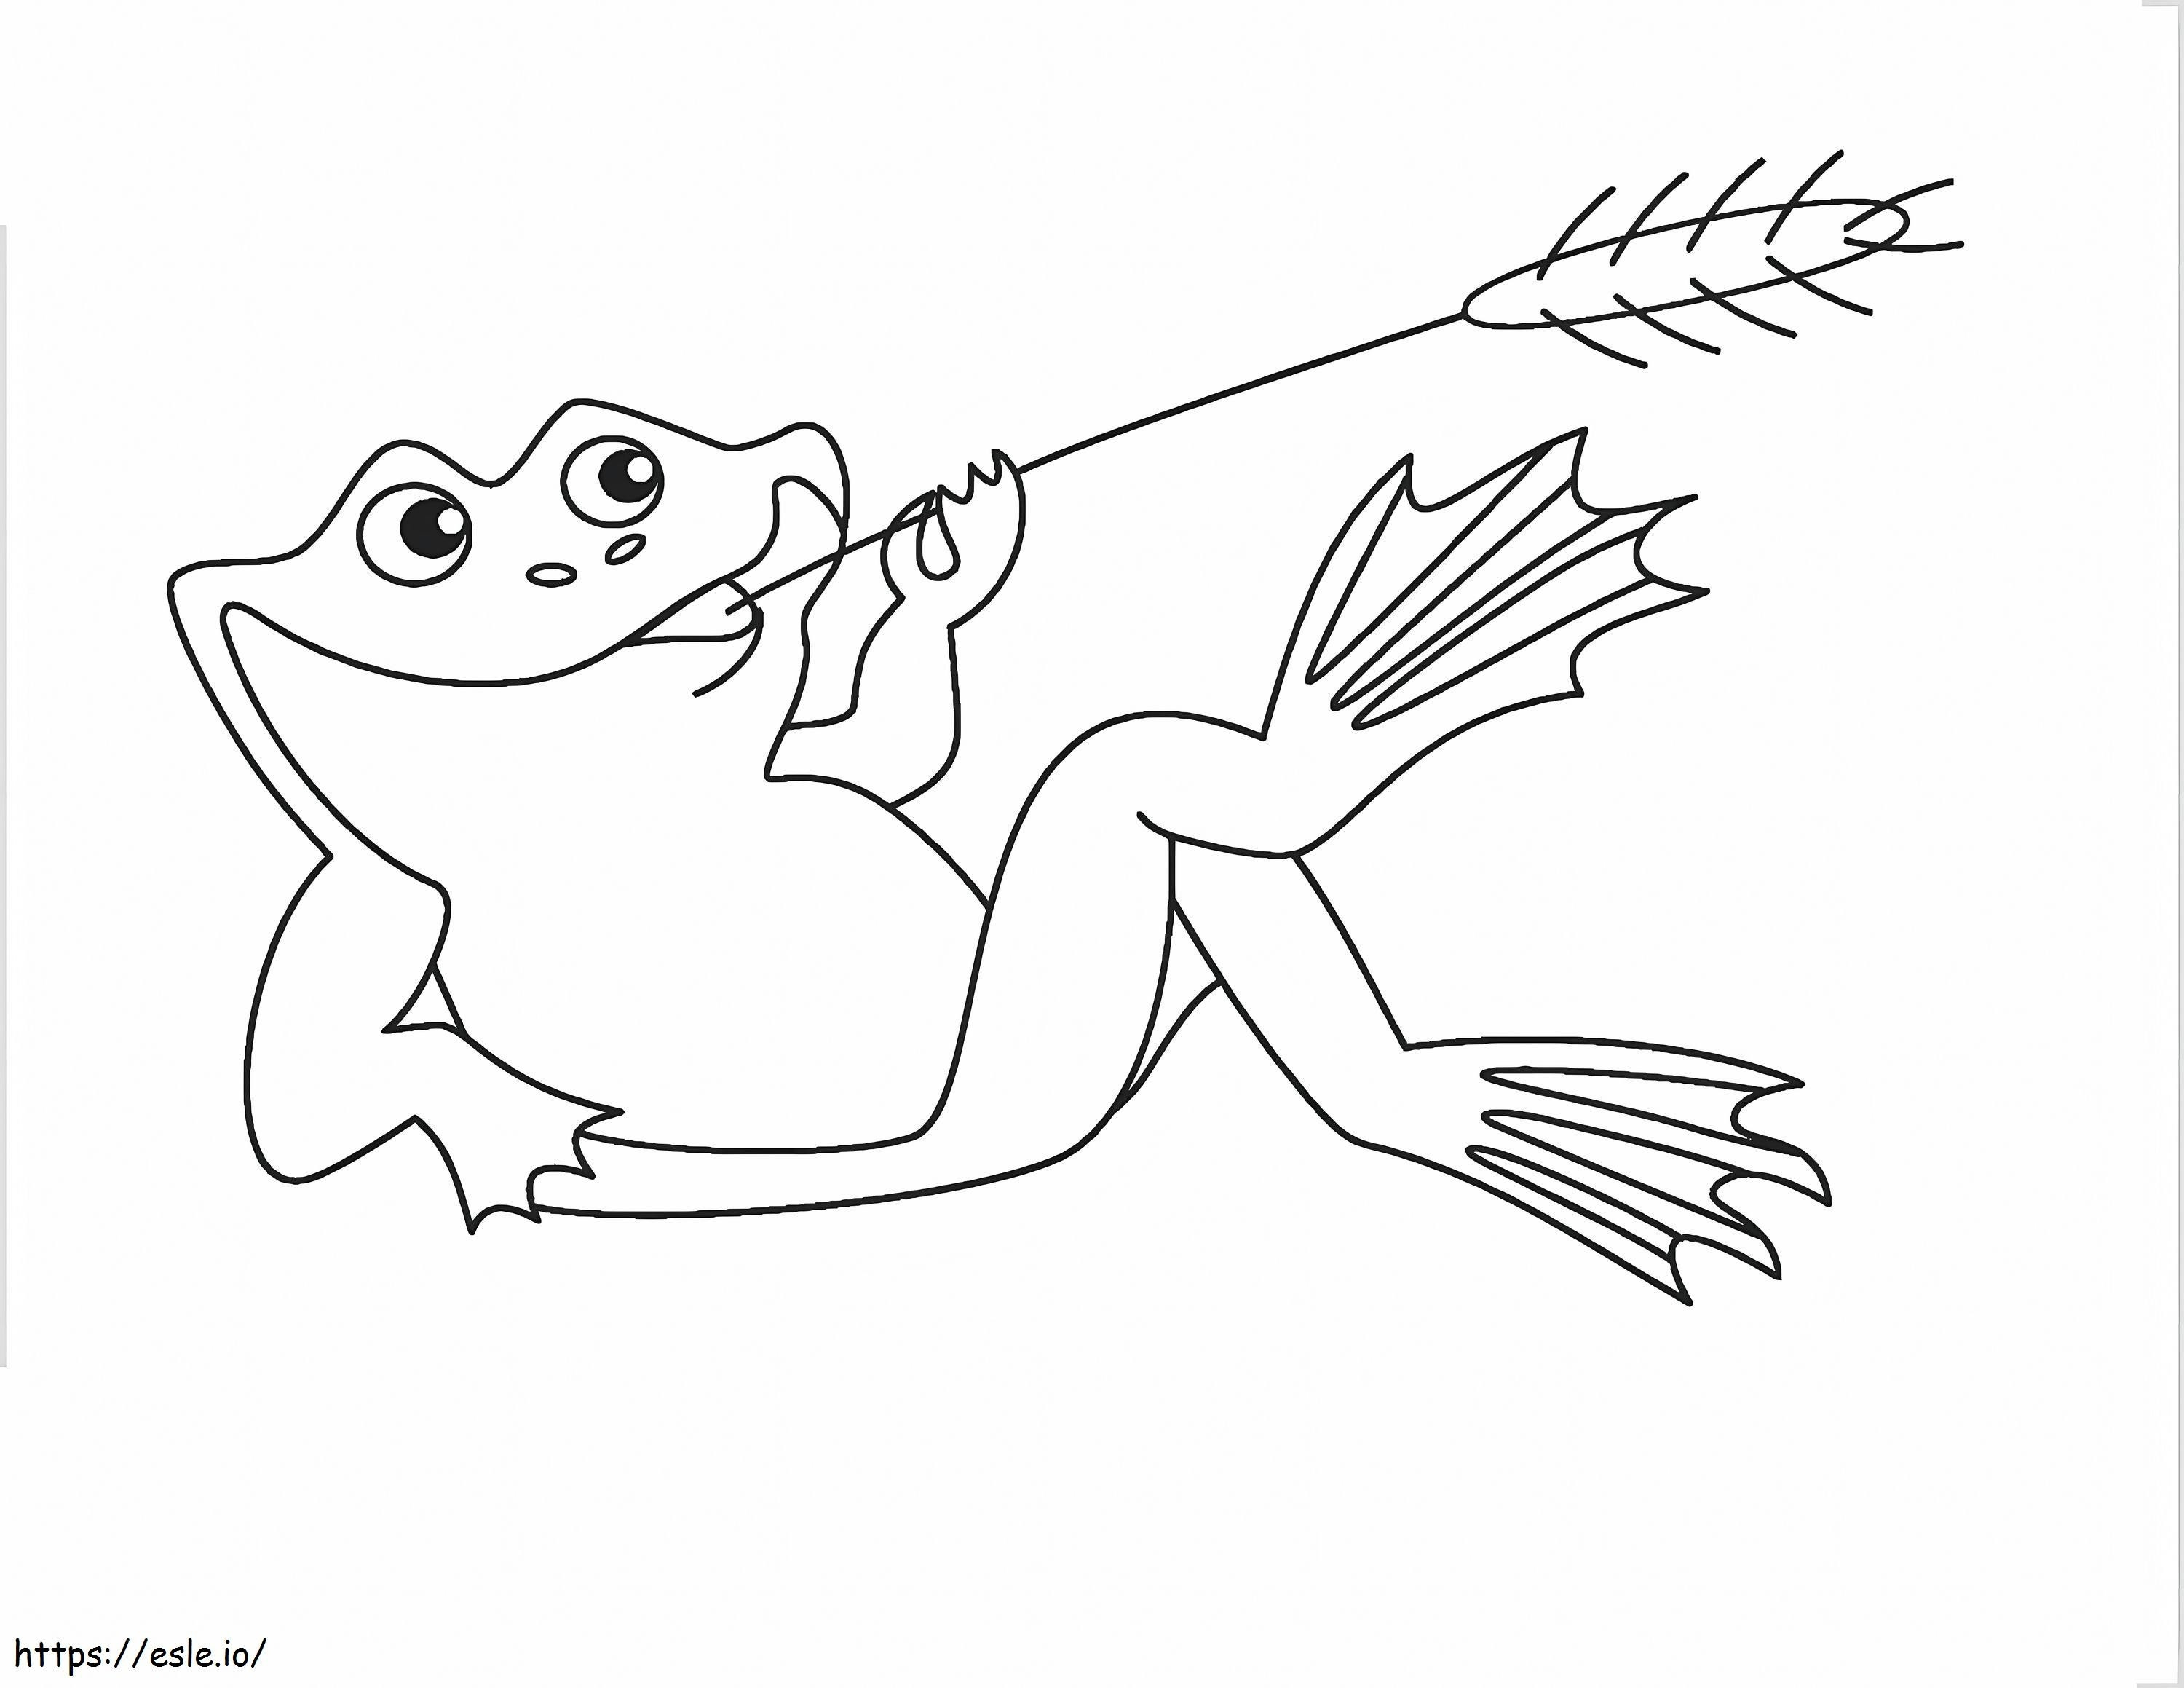 Frog Lying Down coloring page